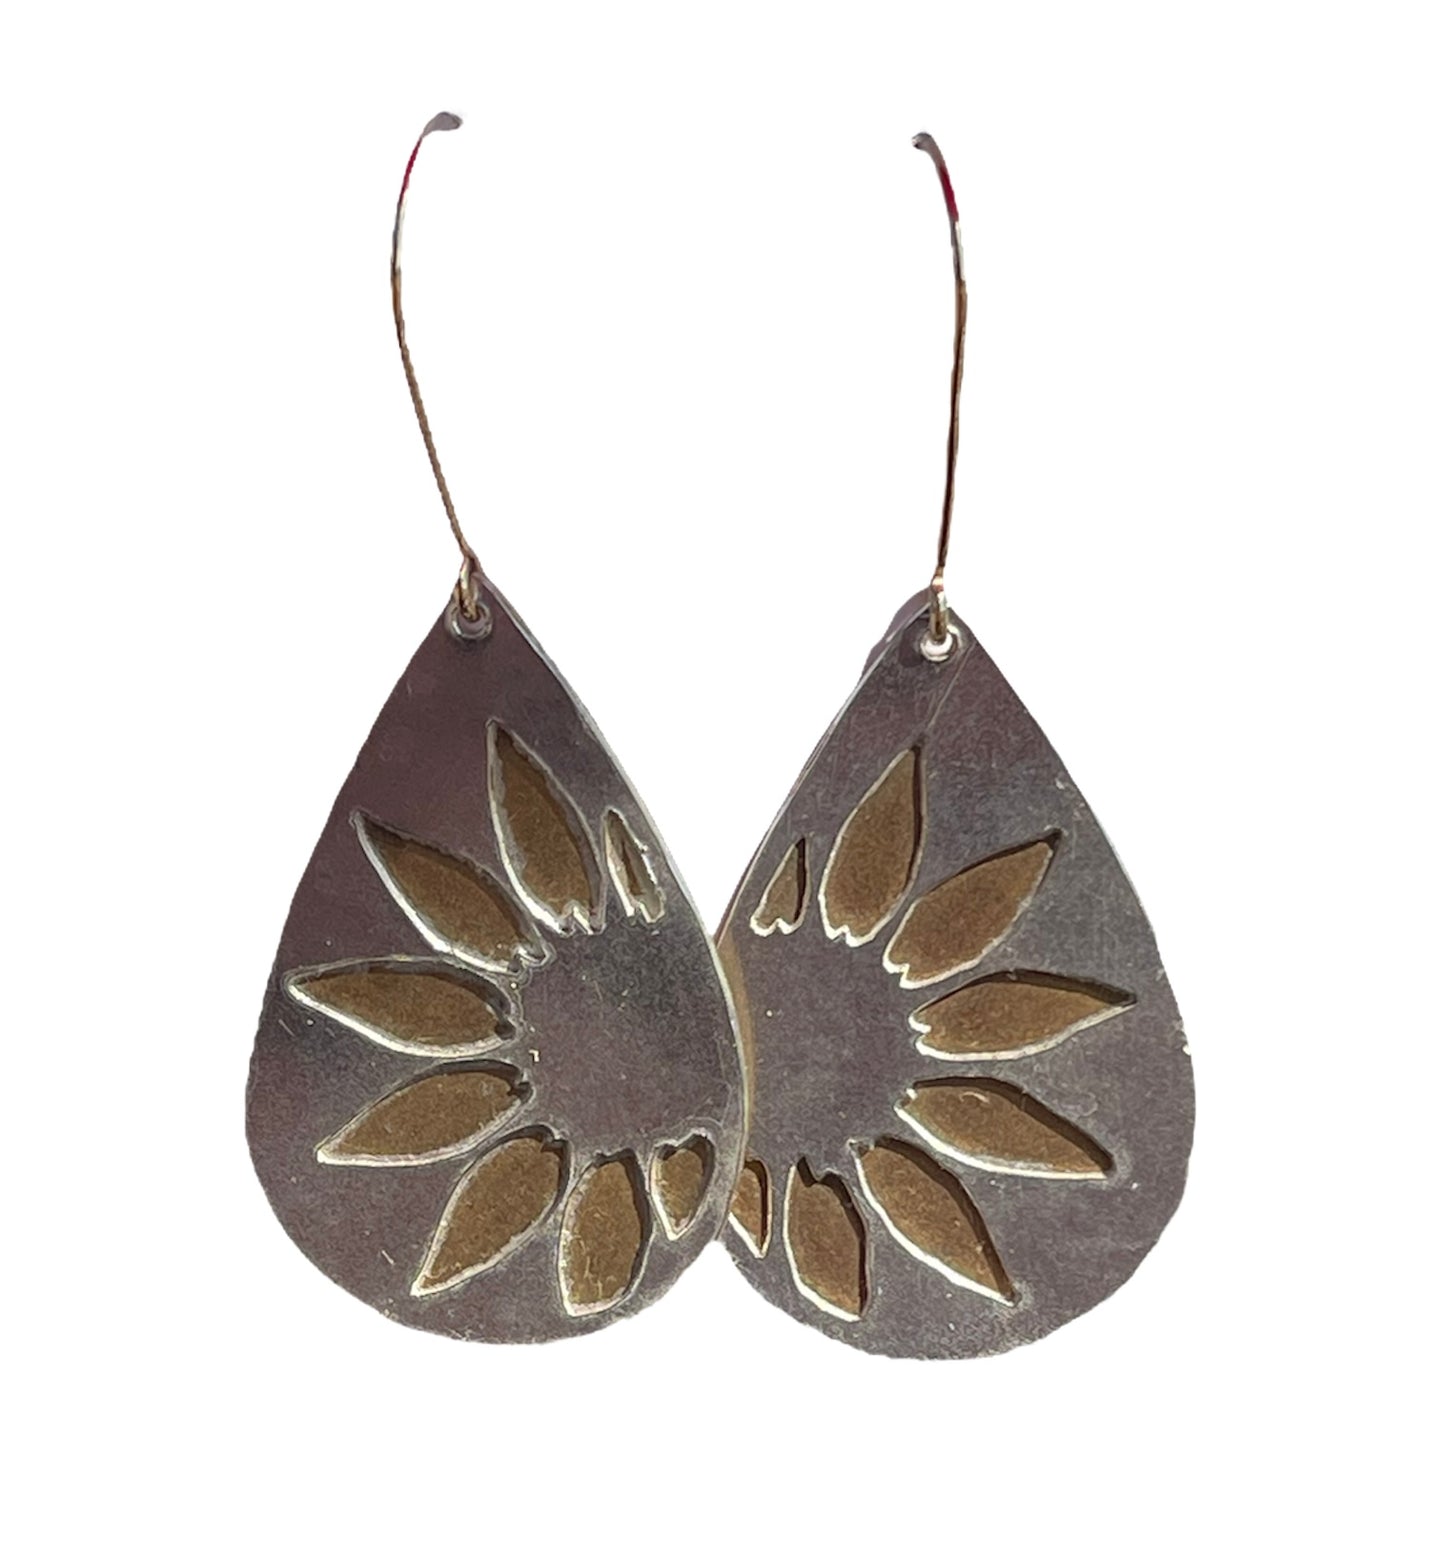 Sunflower earrings sterling silver and jewelry bronze